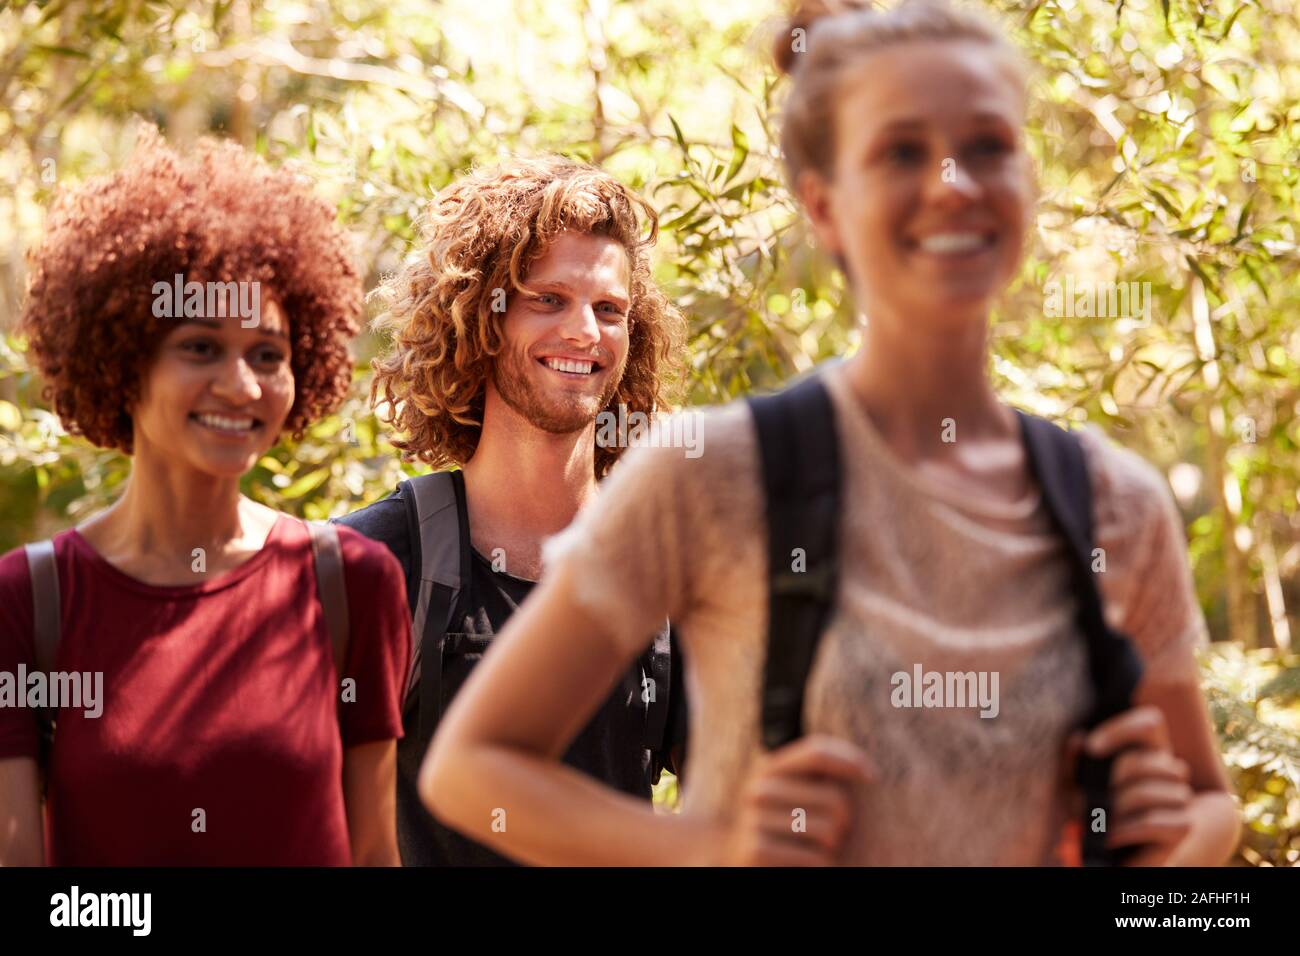 Three happy millennial friends wearing rucksacks on a hike in a forest, close up Stock Photo